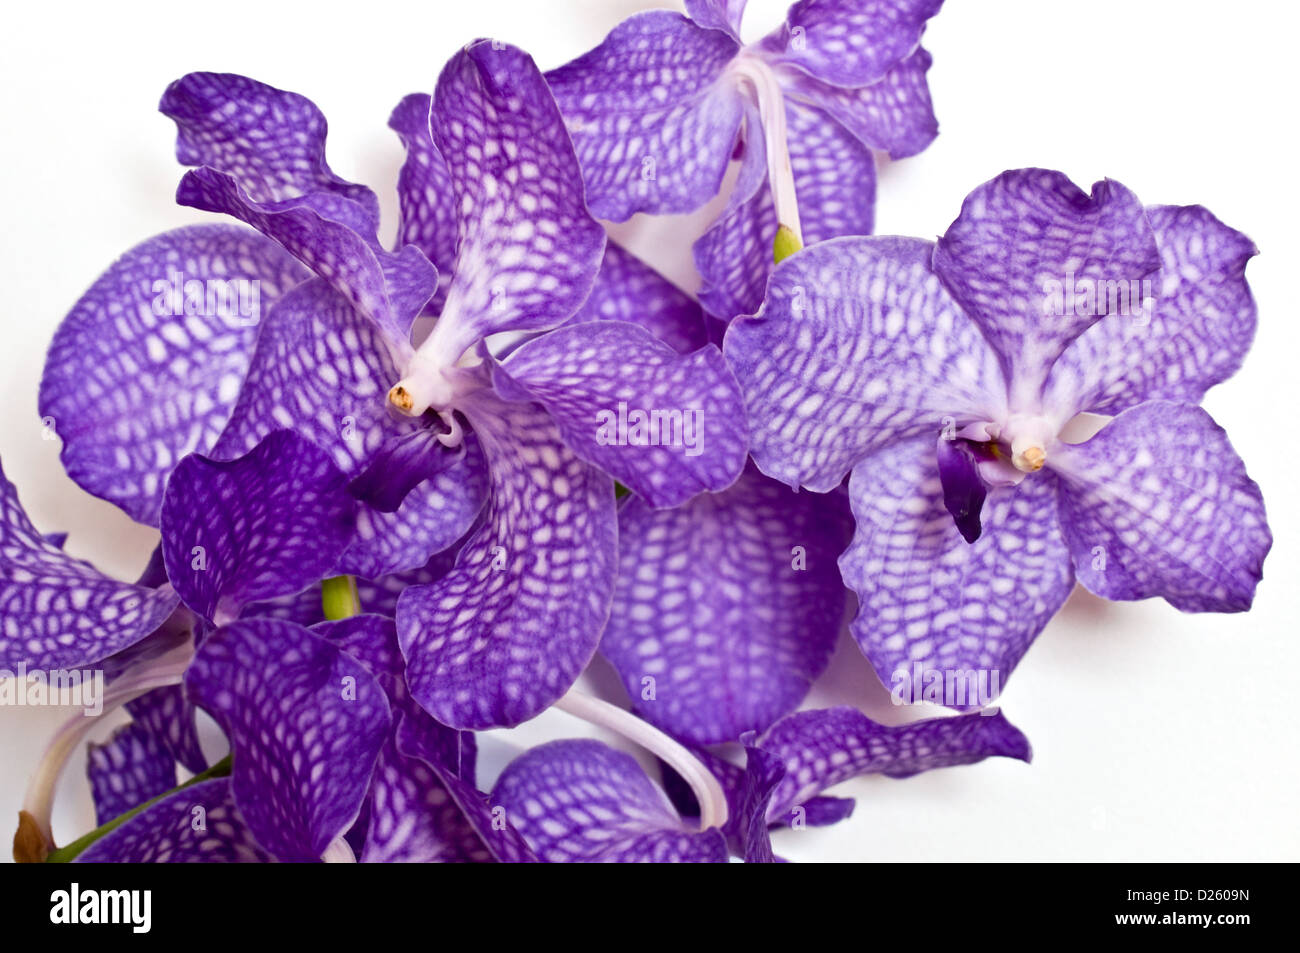 Closeup of a purple Vanda orchid against white background Stock Photo